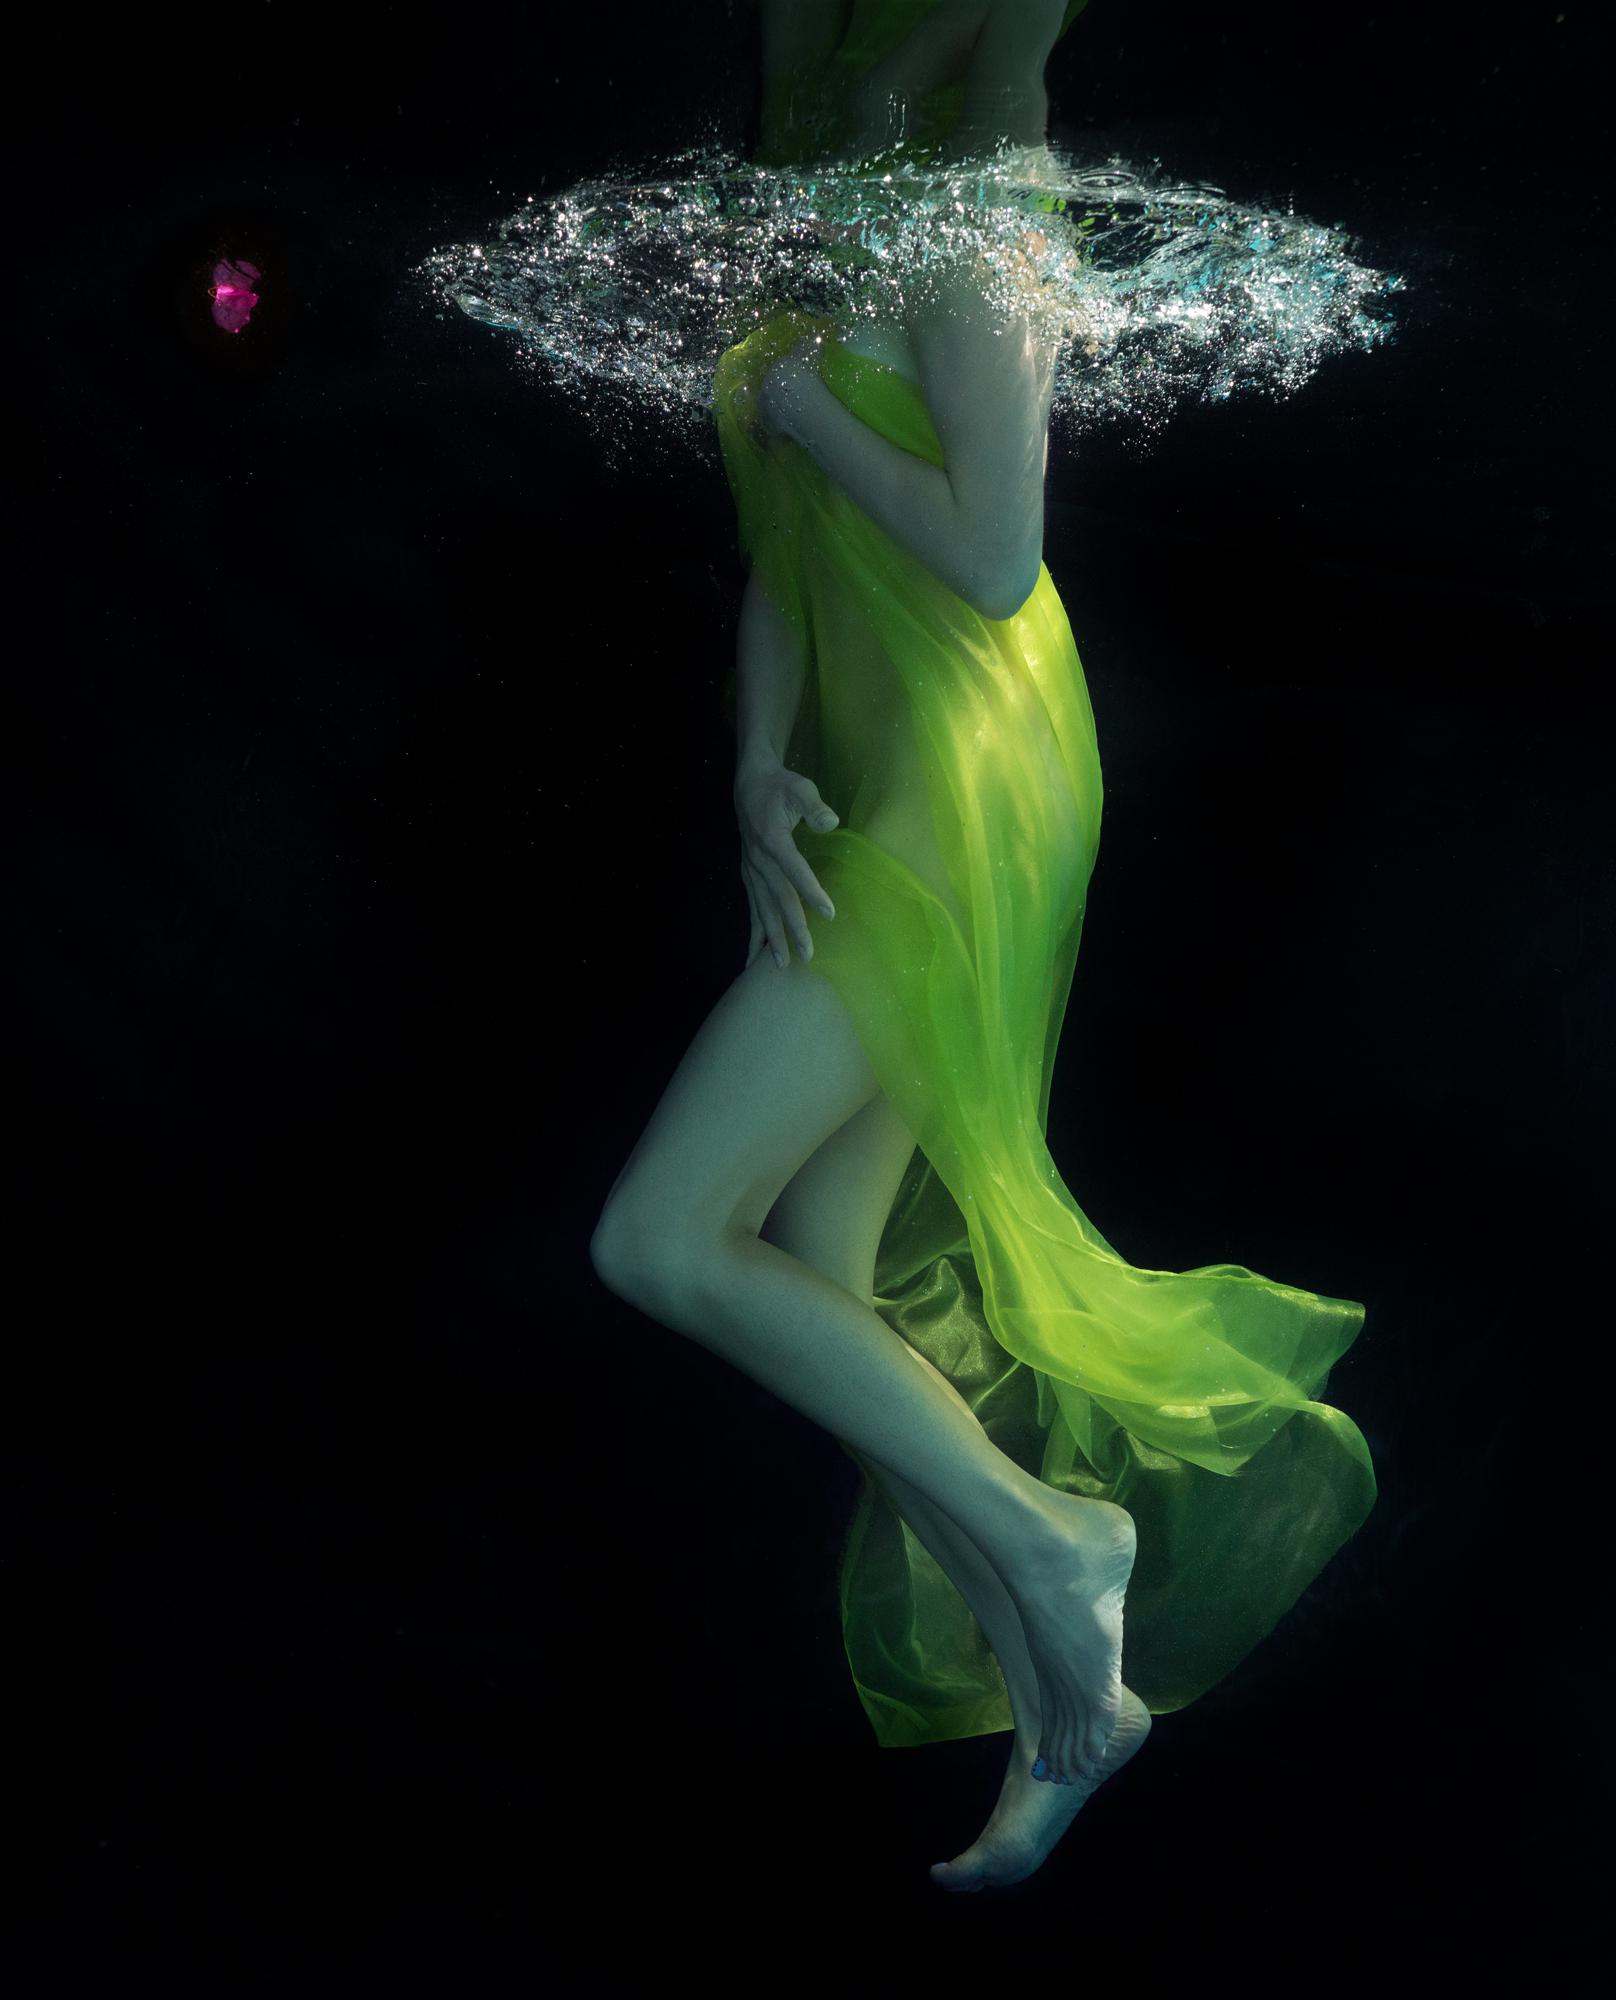 Alex Sher Figurative Photograph - Green Bud - underwater photograph - print on paper 46" x 35"